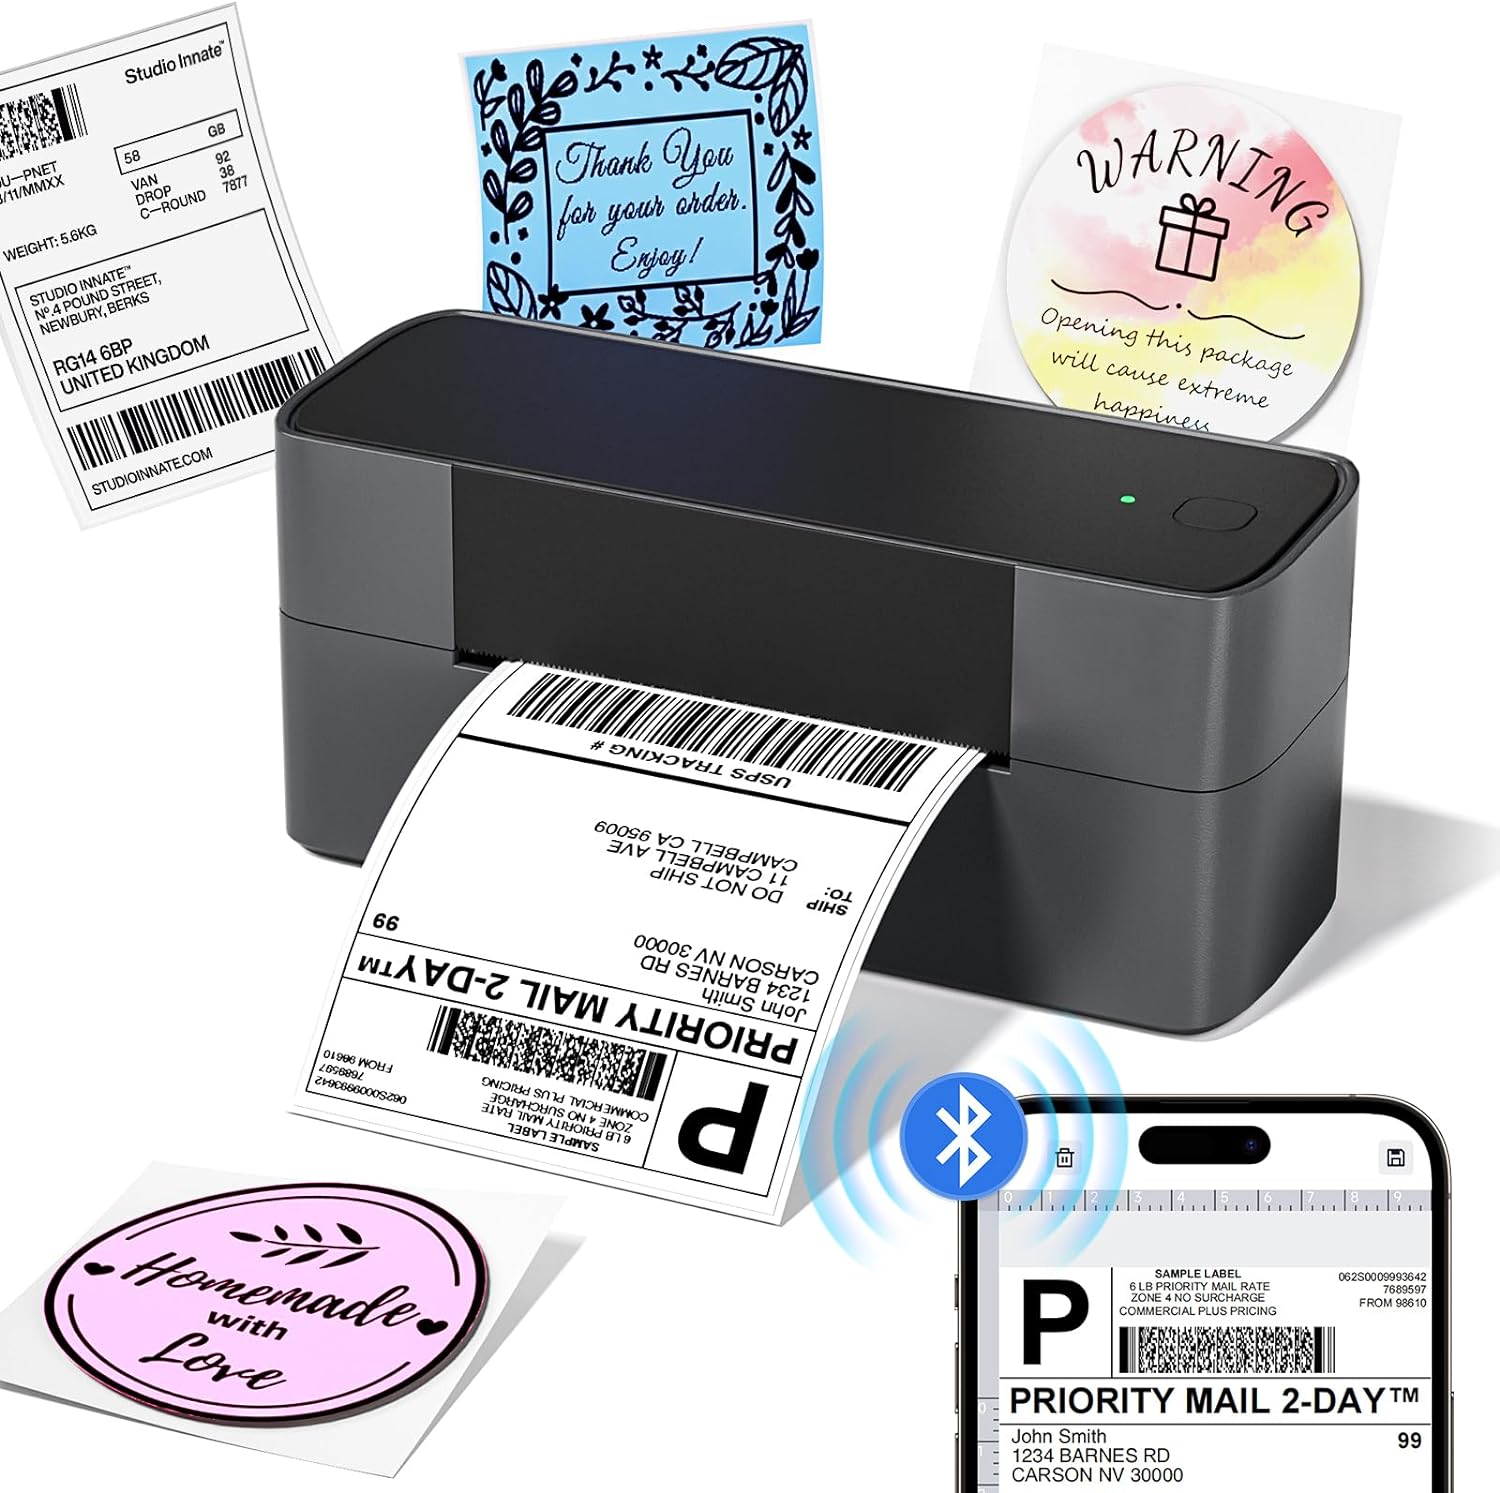 Phomemo PM-245-BTZ Bluebooth Direct Shipping Label Printer